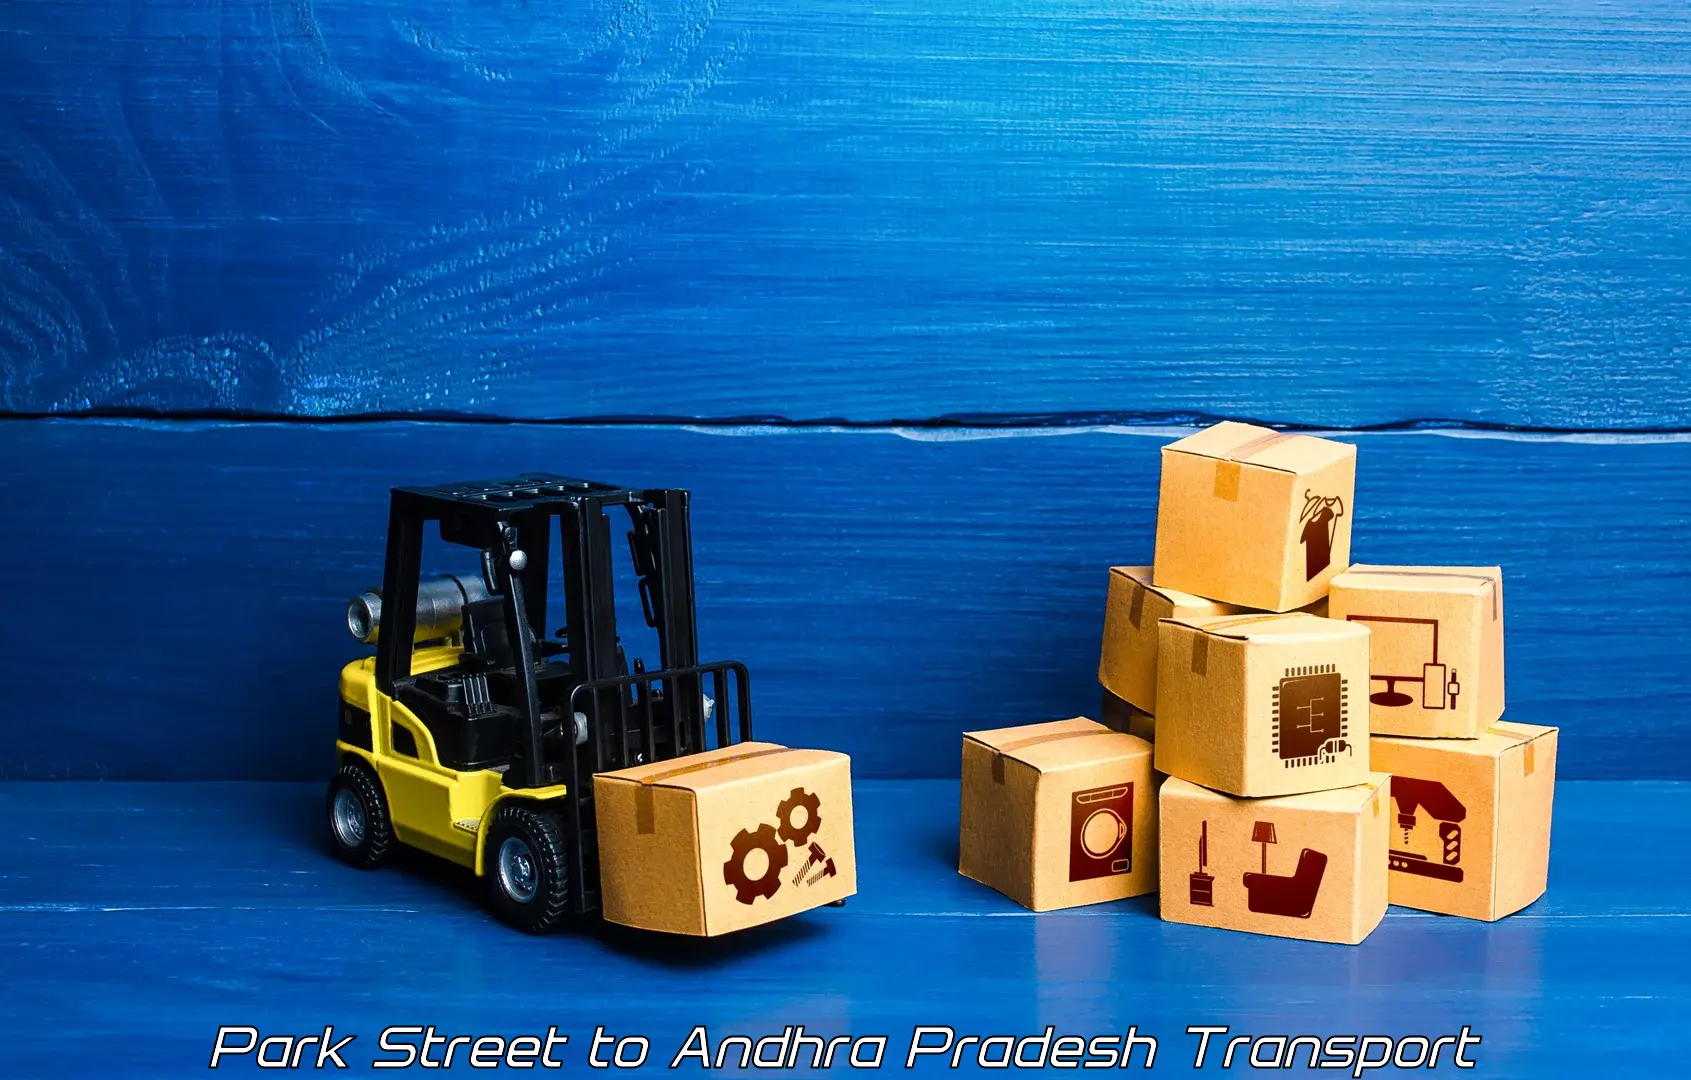 Container transport service in Park Street to NIT Andhra Pradesh